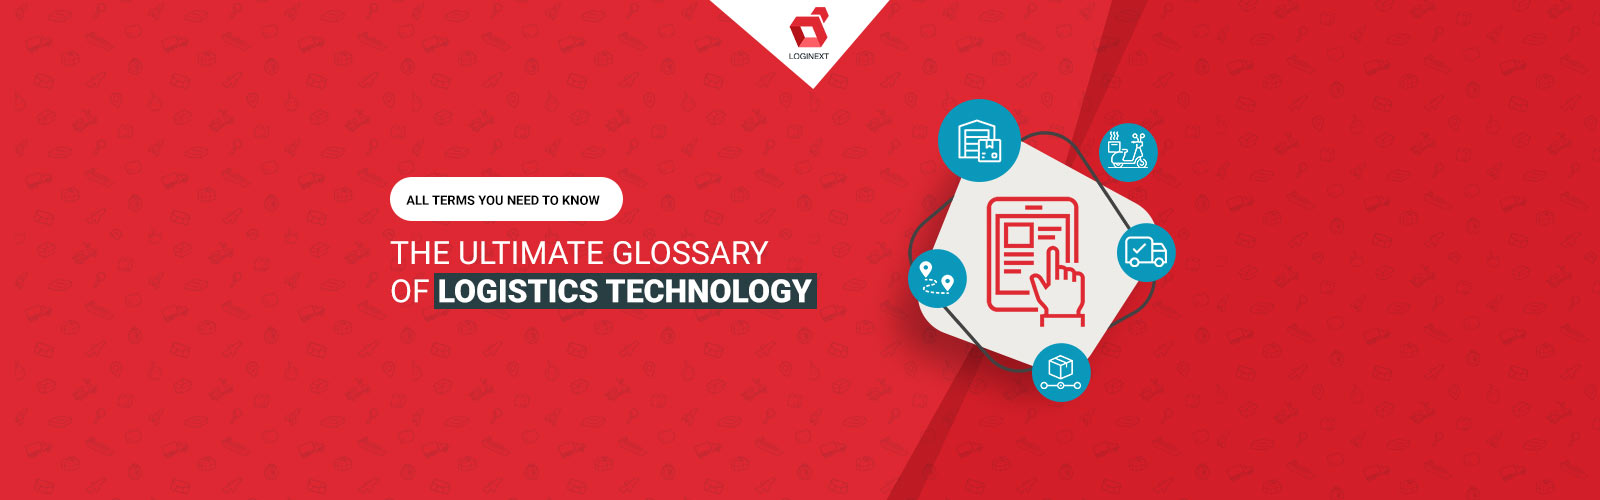 Glossary of Logistics Management Terminology: All you need to know!